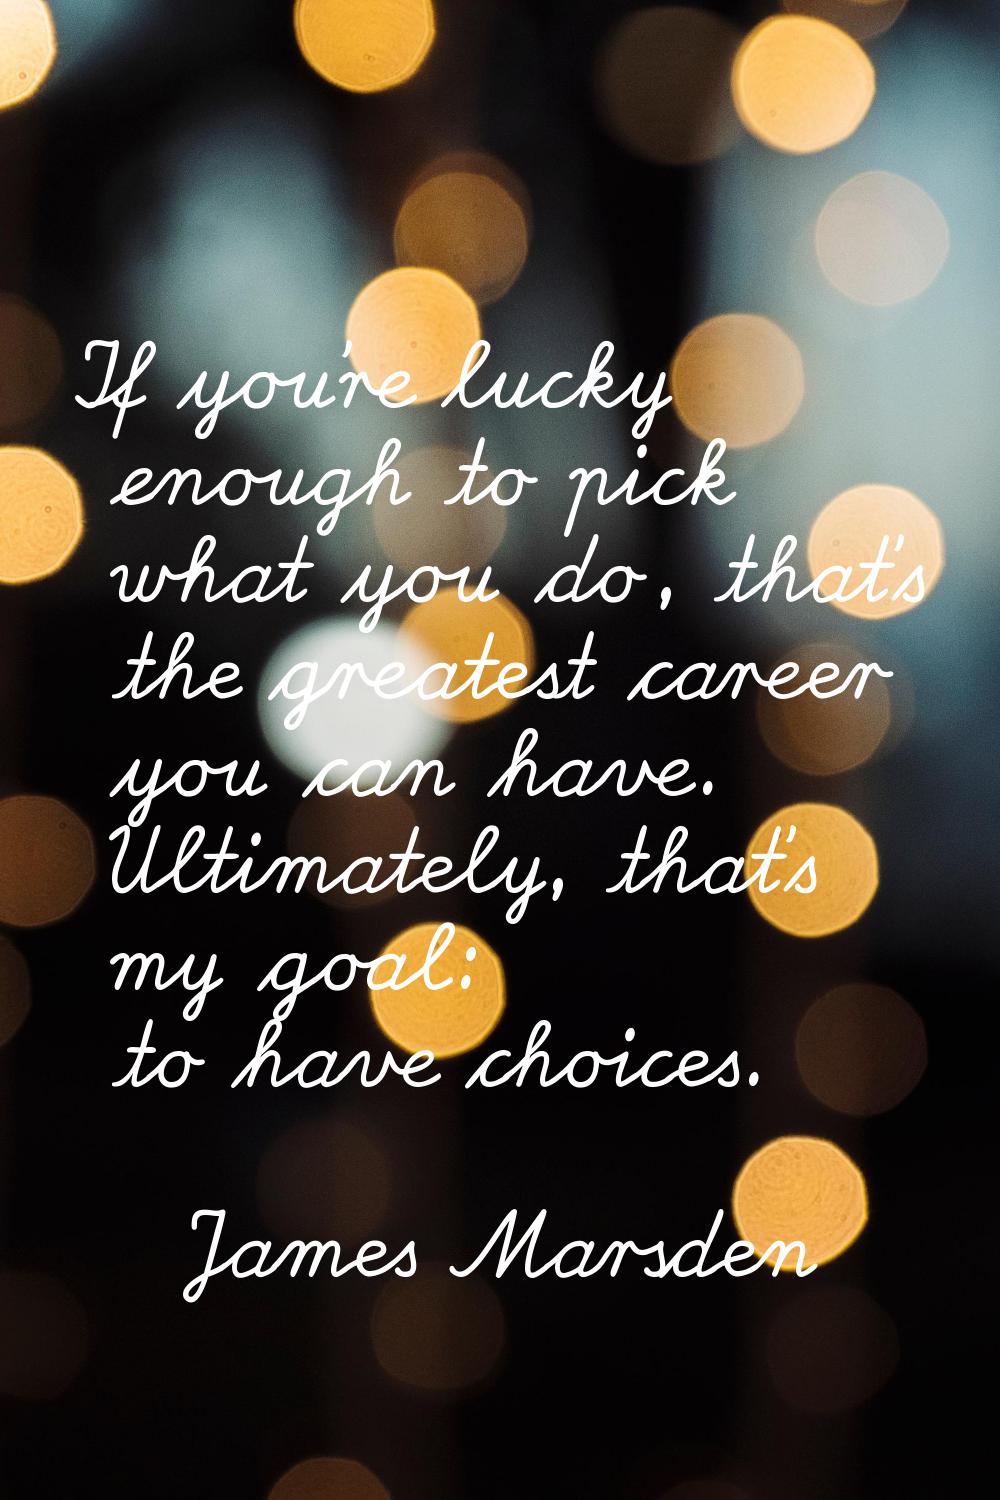 If you're lucky enough to pick what you do, that's the greatest career you can have. Ultimately, th